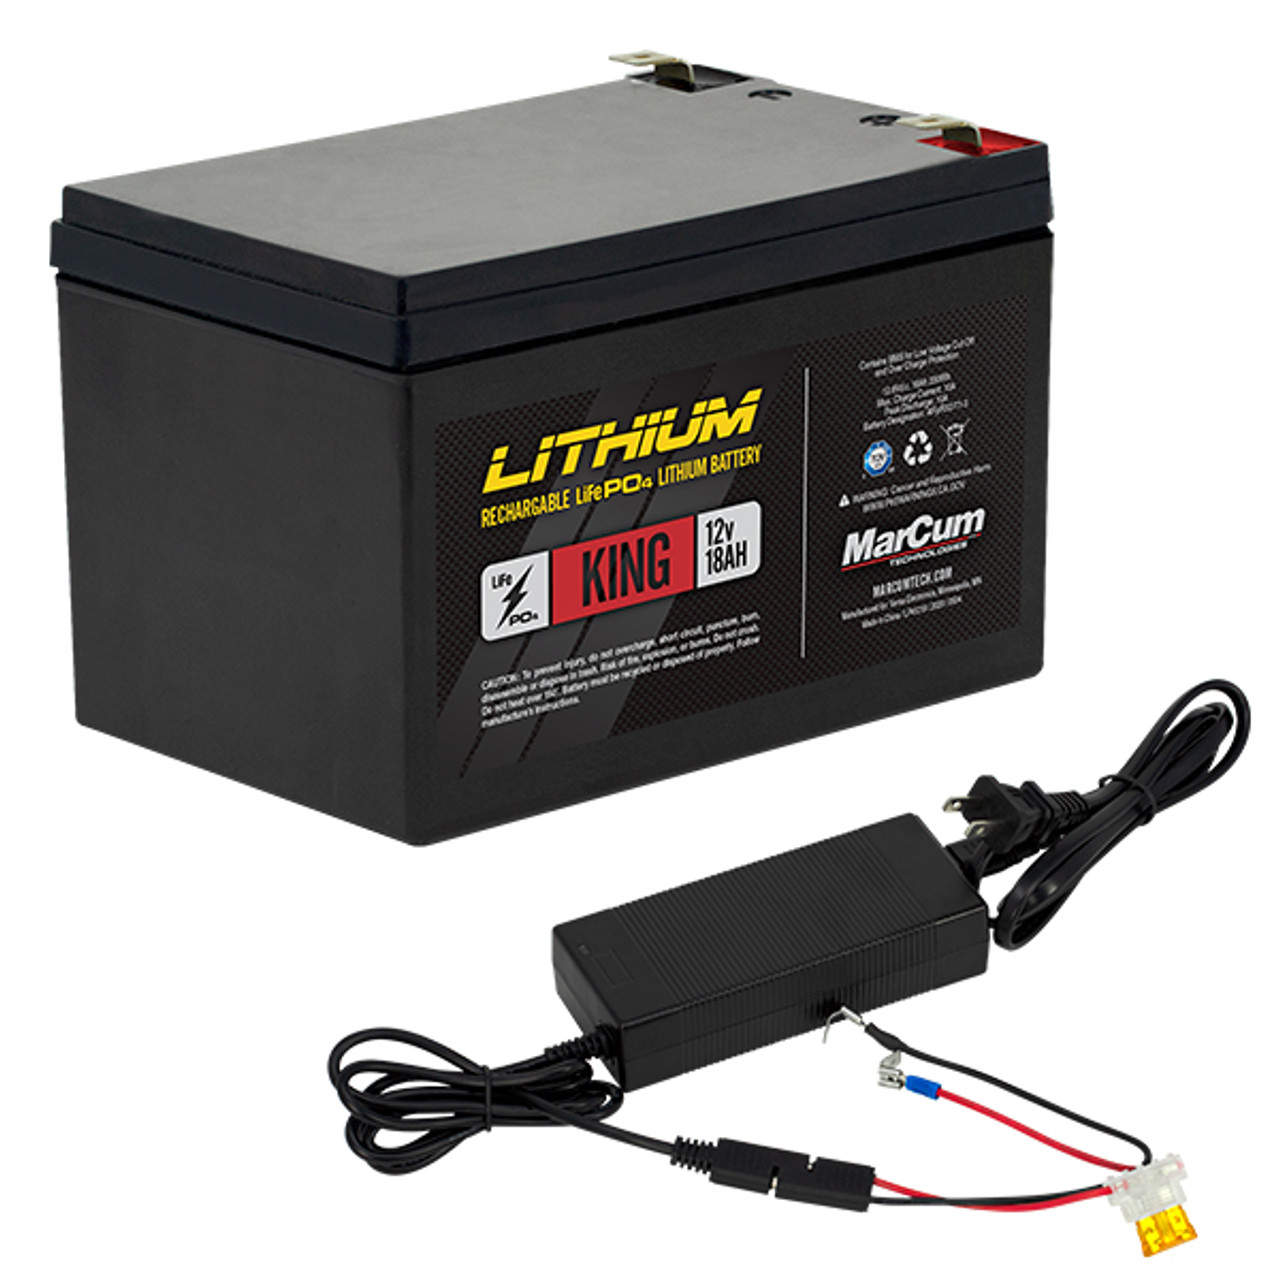 Marcum Lithium Battery King 12v/18ah LifePo4 Includes 6amp Charger